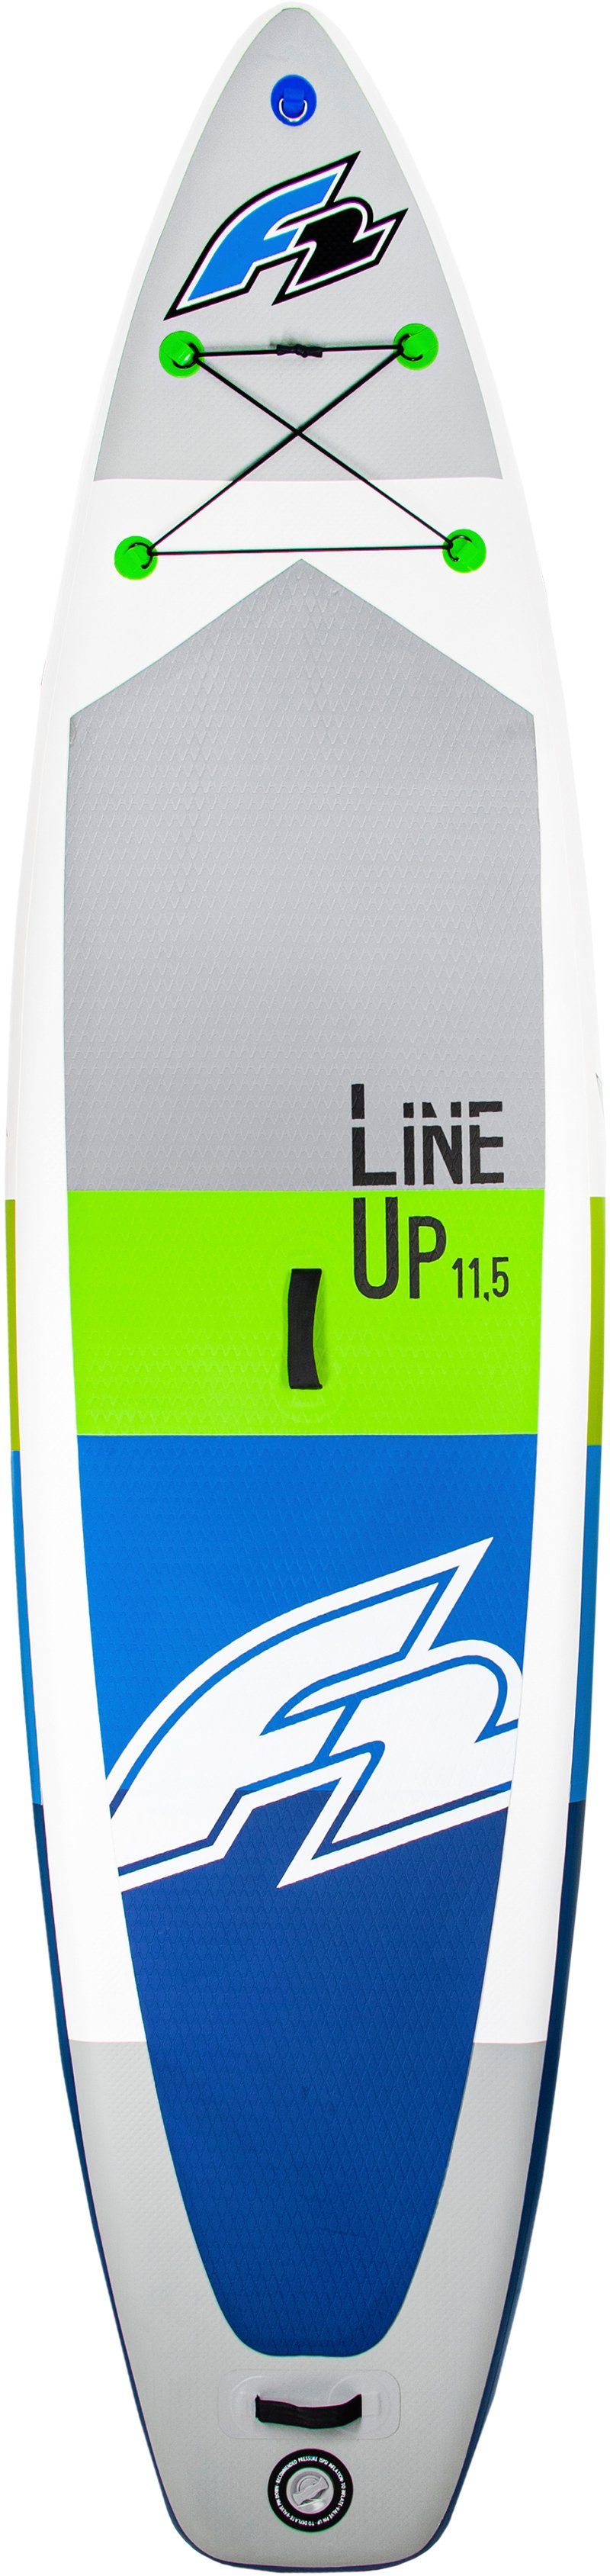 F2 Inflatable Up (Set, SMO blue 5 Stand Up tlg), Alupaddel, Paddling SUP-Board Line F2 mit